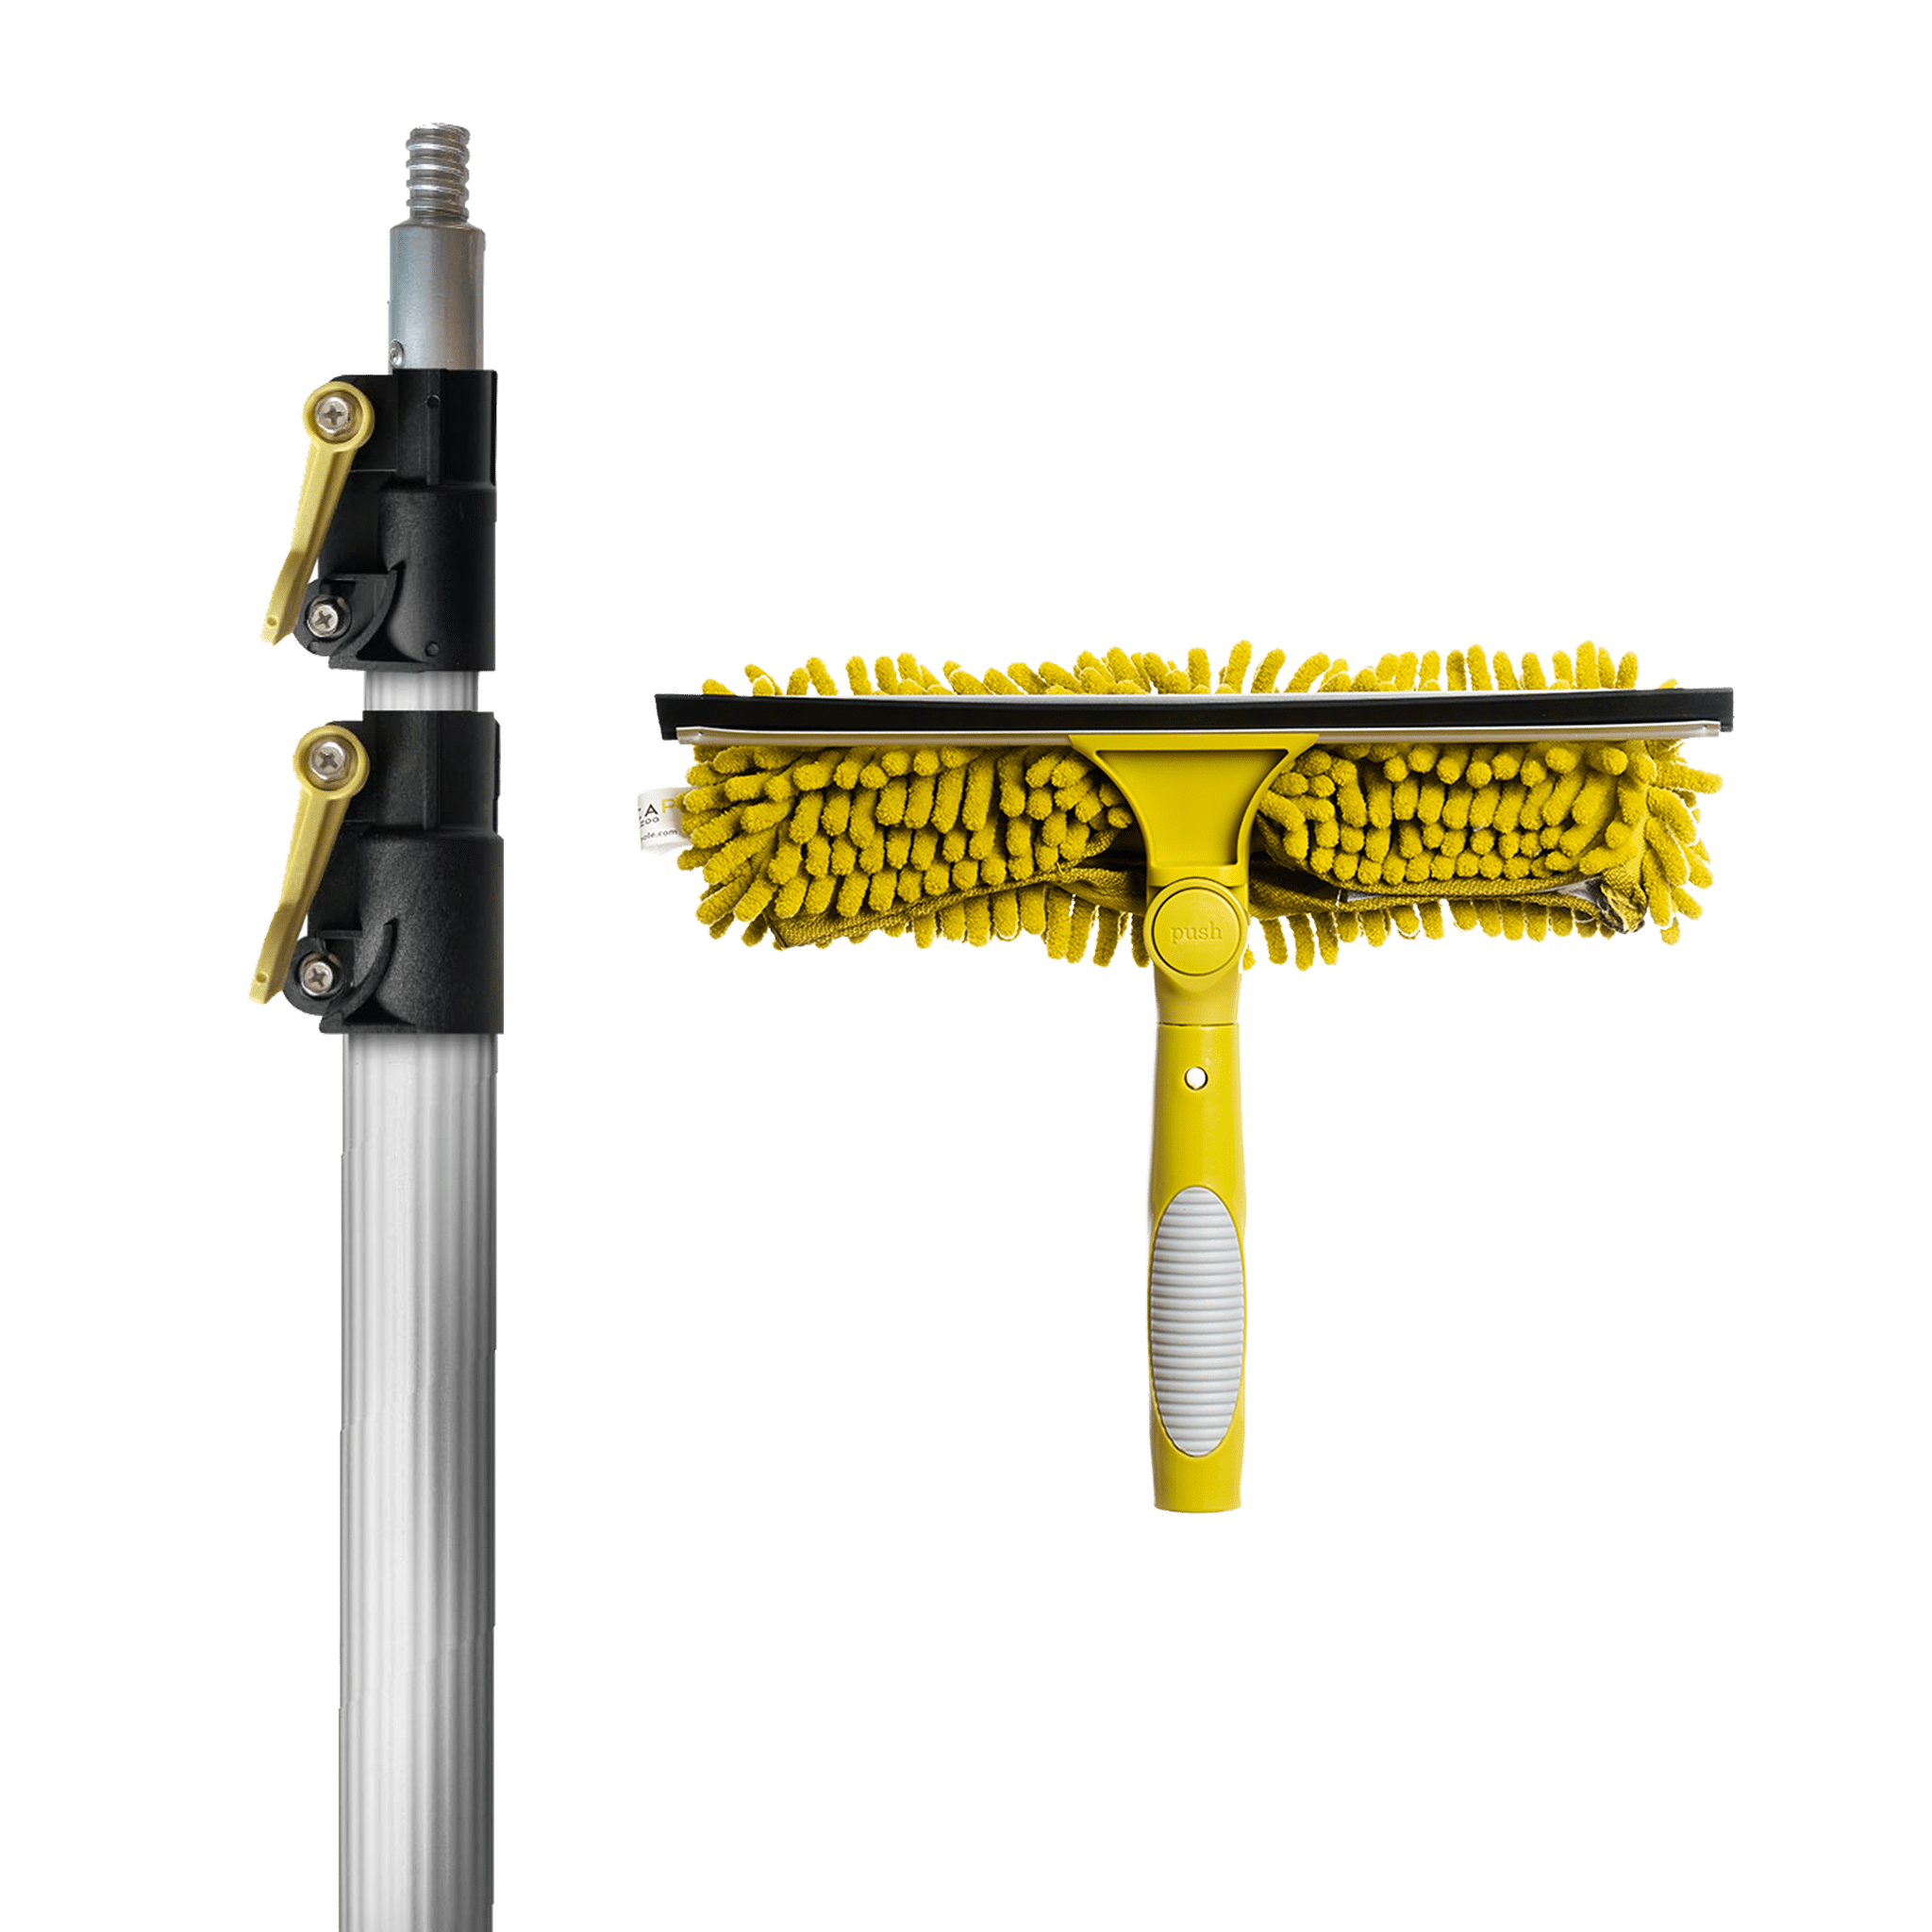 Docapole 5-12 Foot Extension Pole + 3 Sizes of Squeegee Blades